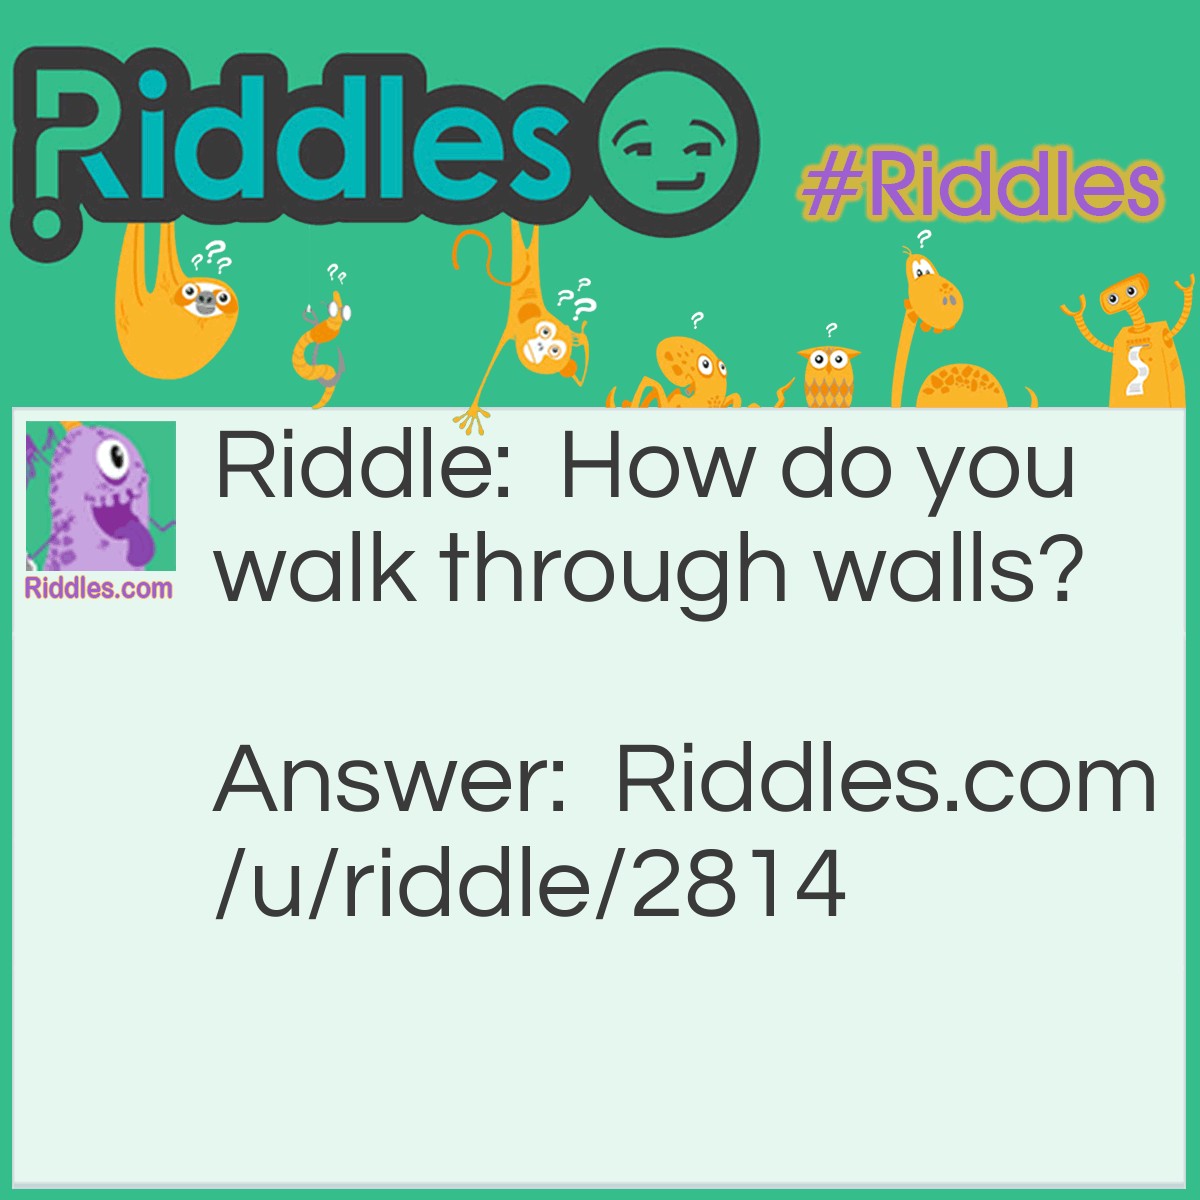 Riddle: How do you walk through walls? Answer: You walk through walls........ by using doors!